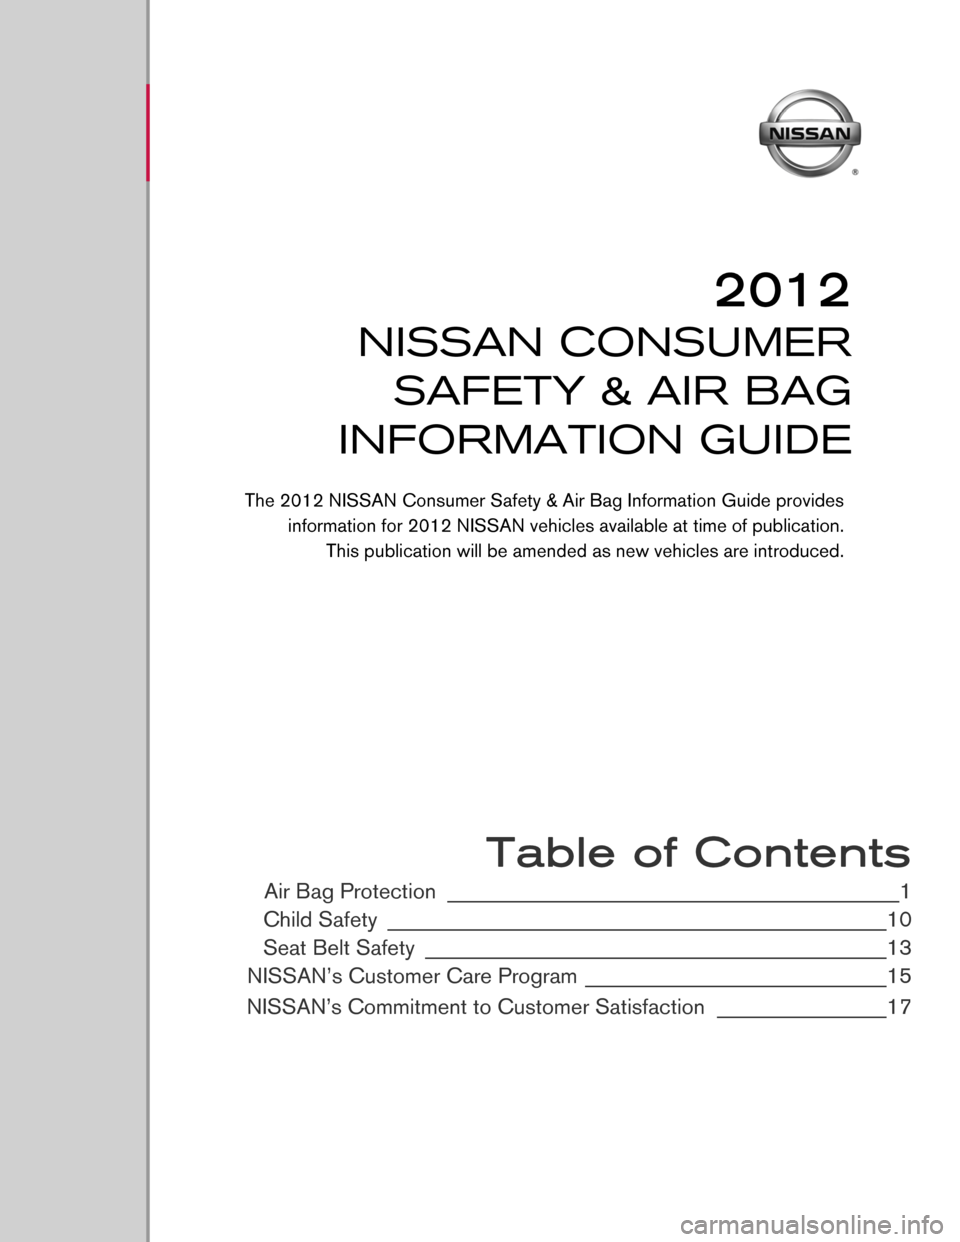 NISSAN XTERRA 2012 N50 / 2.G Consumer Safety Air Bag Information Guide  
 
 
 
 
 
 
 
 
 
 
 
 
 
 
 
 
 
 
 
 
 
 
 Table of Contents
Air Bag Protection ________________________________________________1
Child Safety
 ____________________________________________________